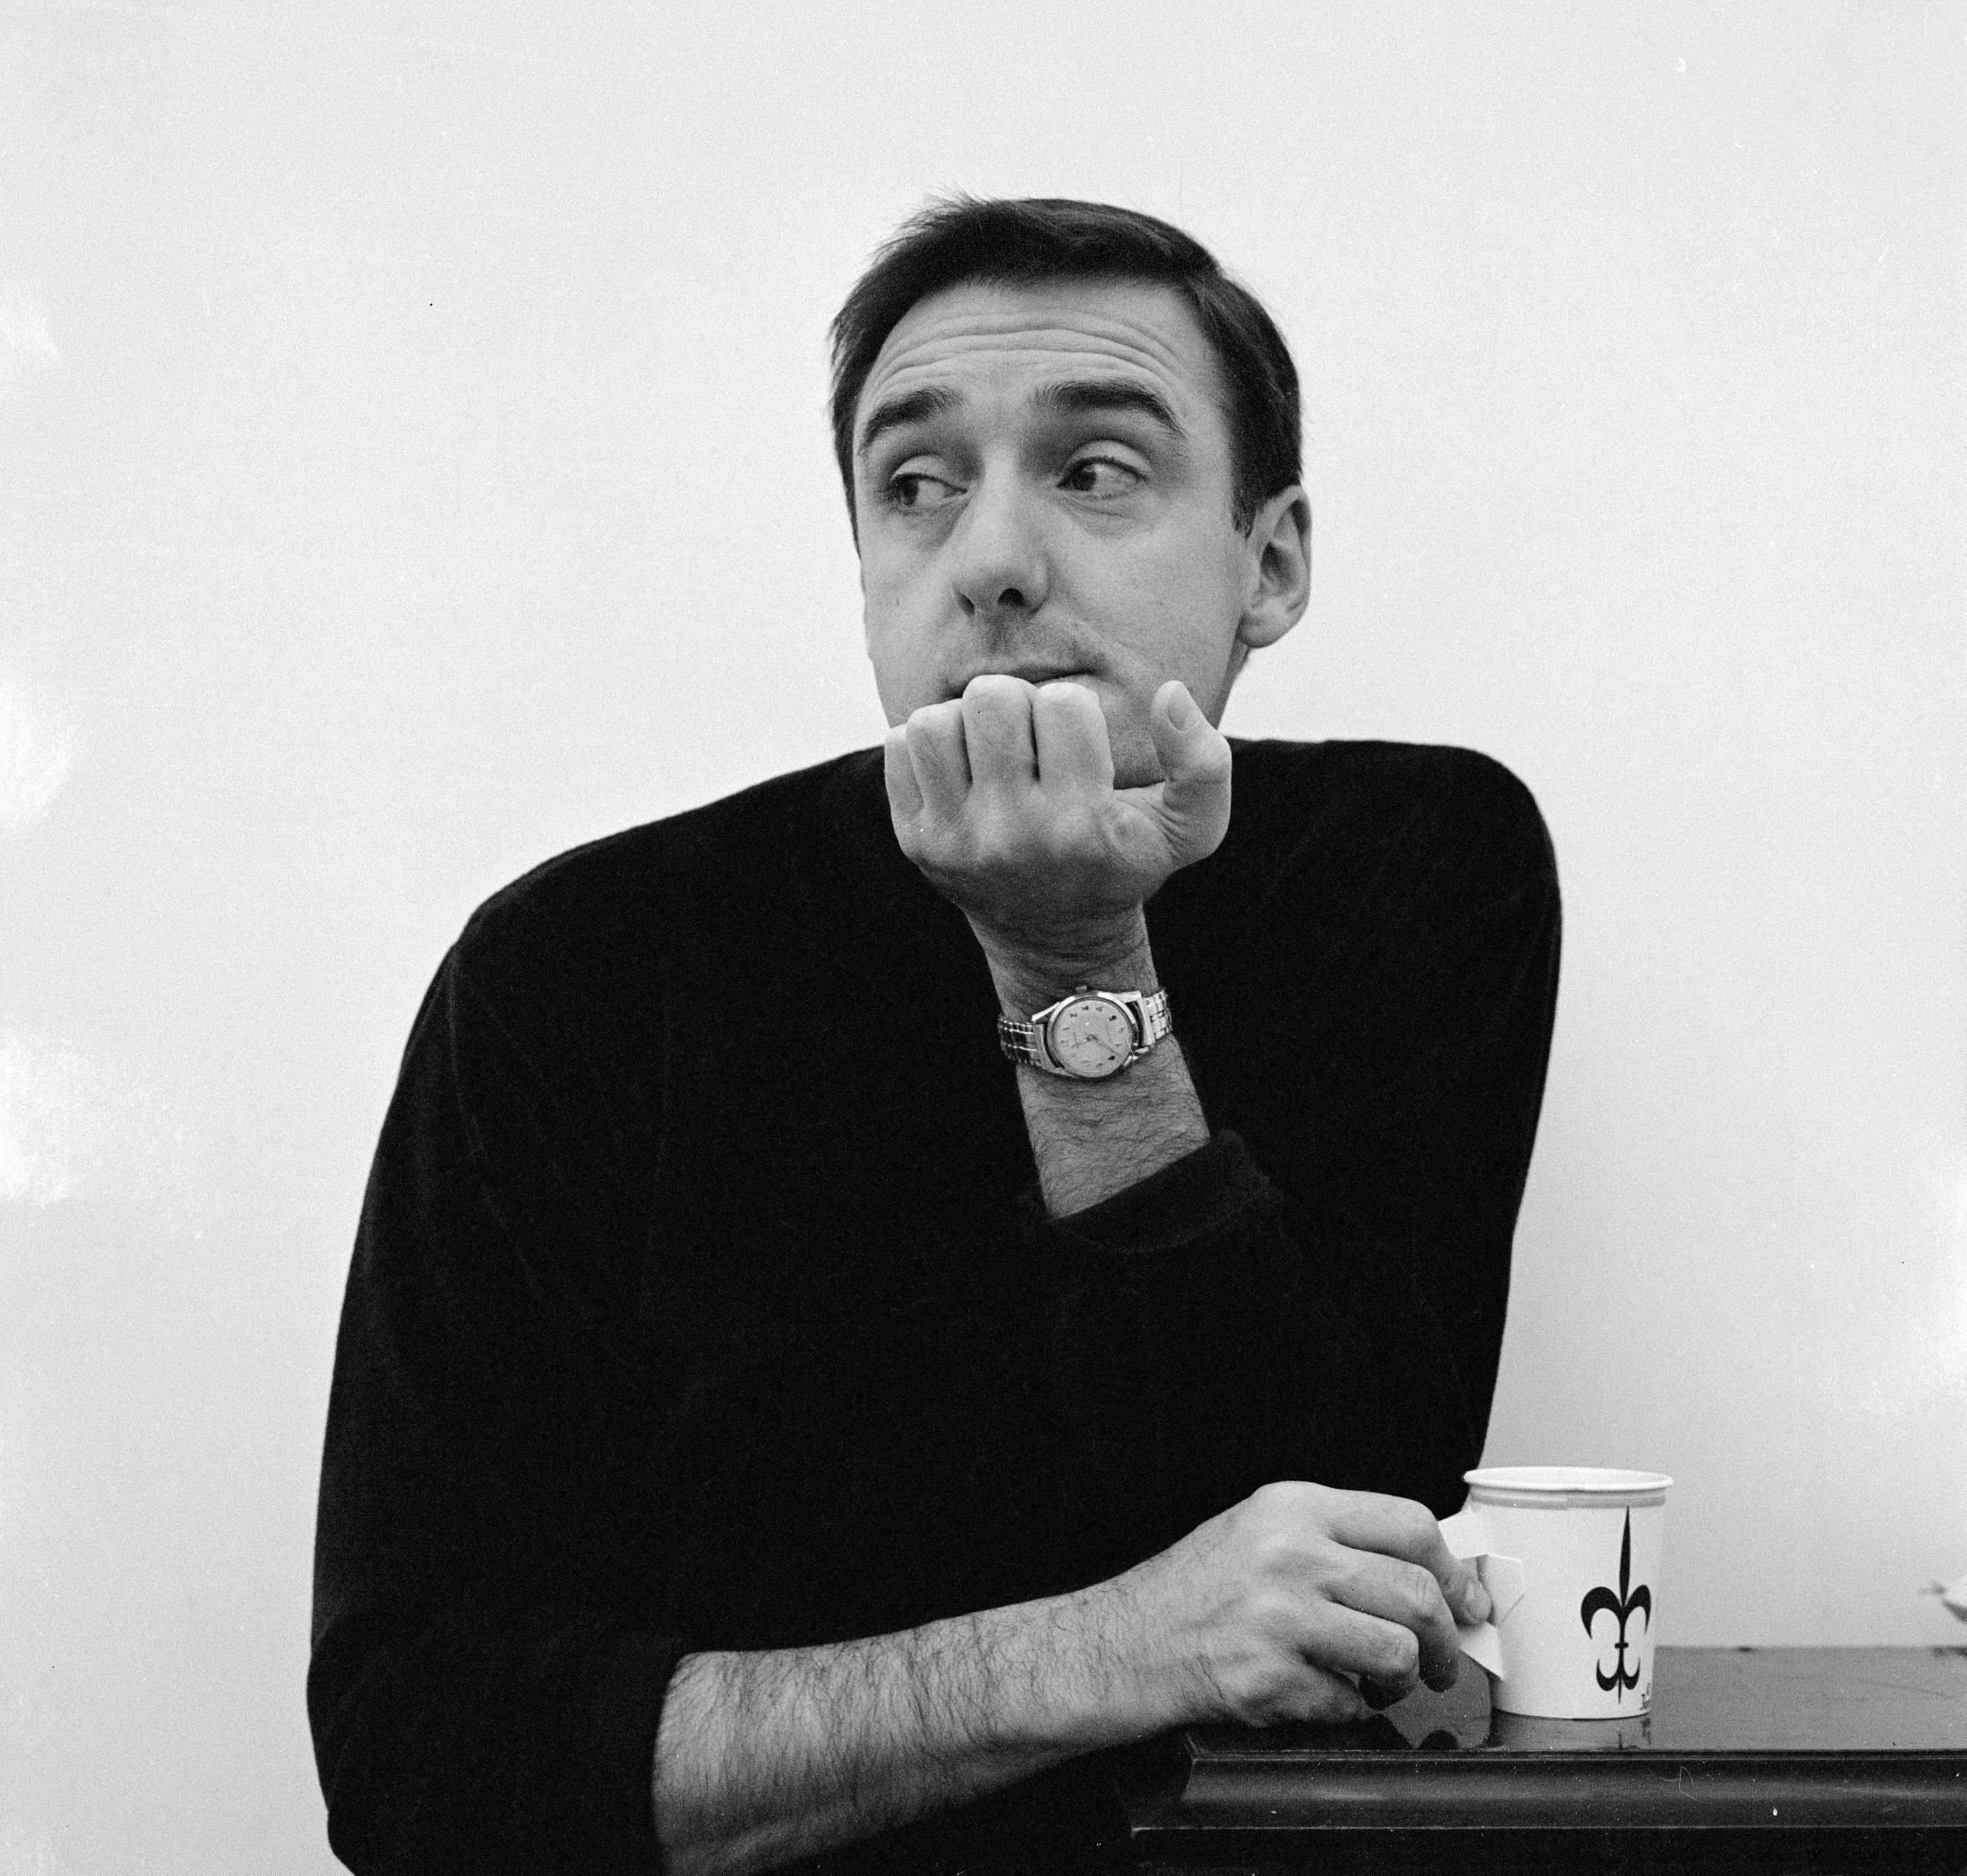 Jim Nabors relaxes over a cup of coffee while at a rehearsal for an upcoming show on September 6, 1965 | Source: Getty Images